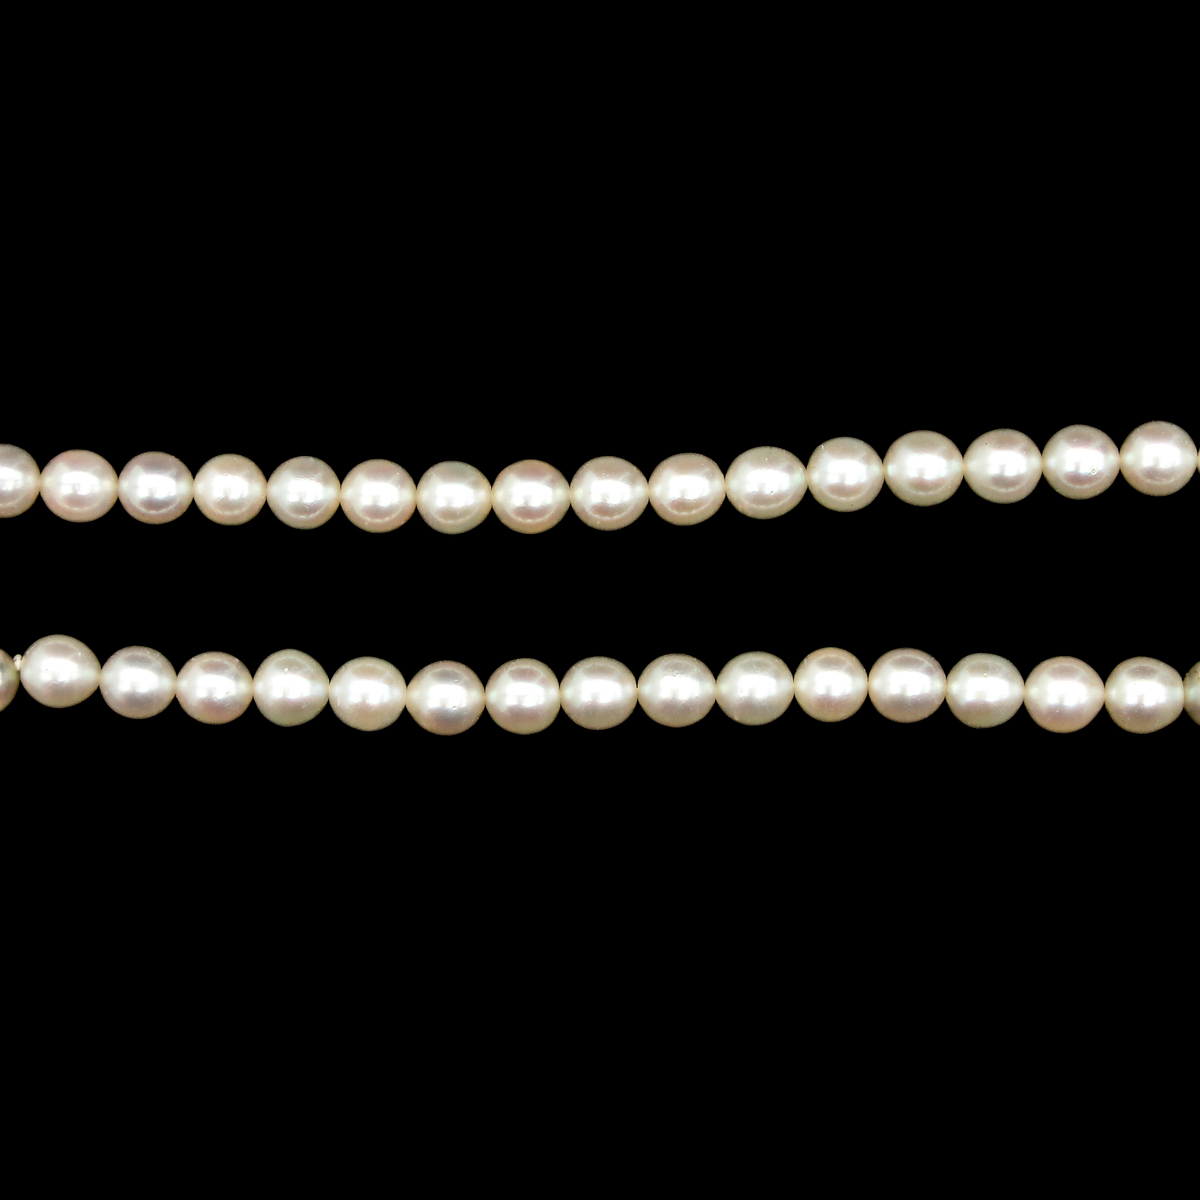 A Collection of 4 Pearl Necklaces - Image 8 of 10